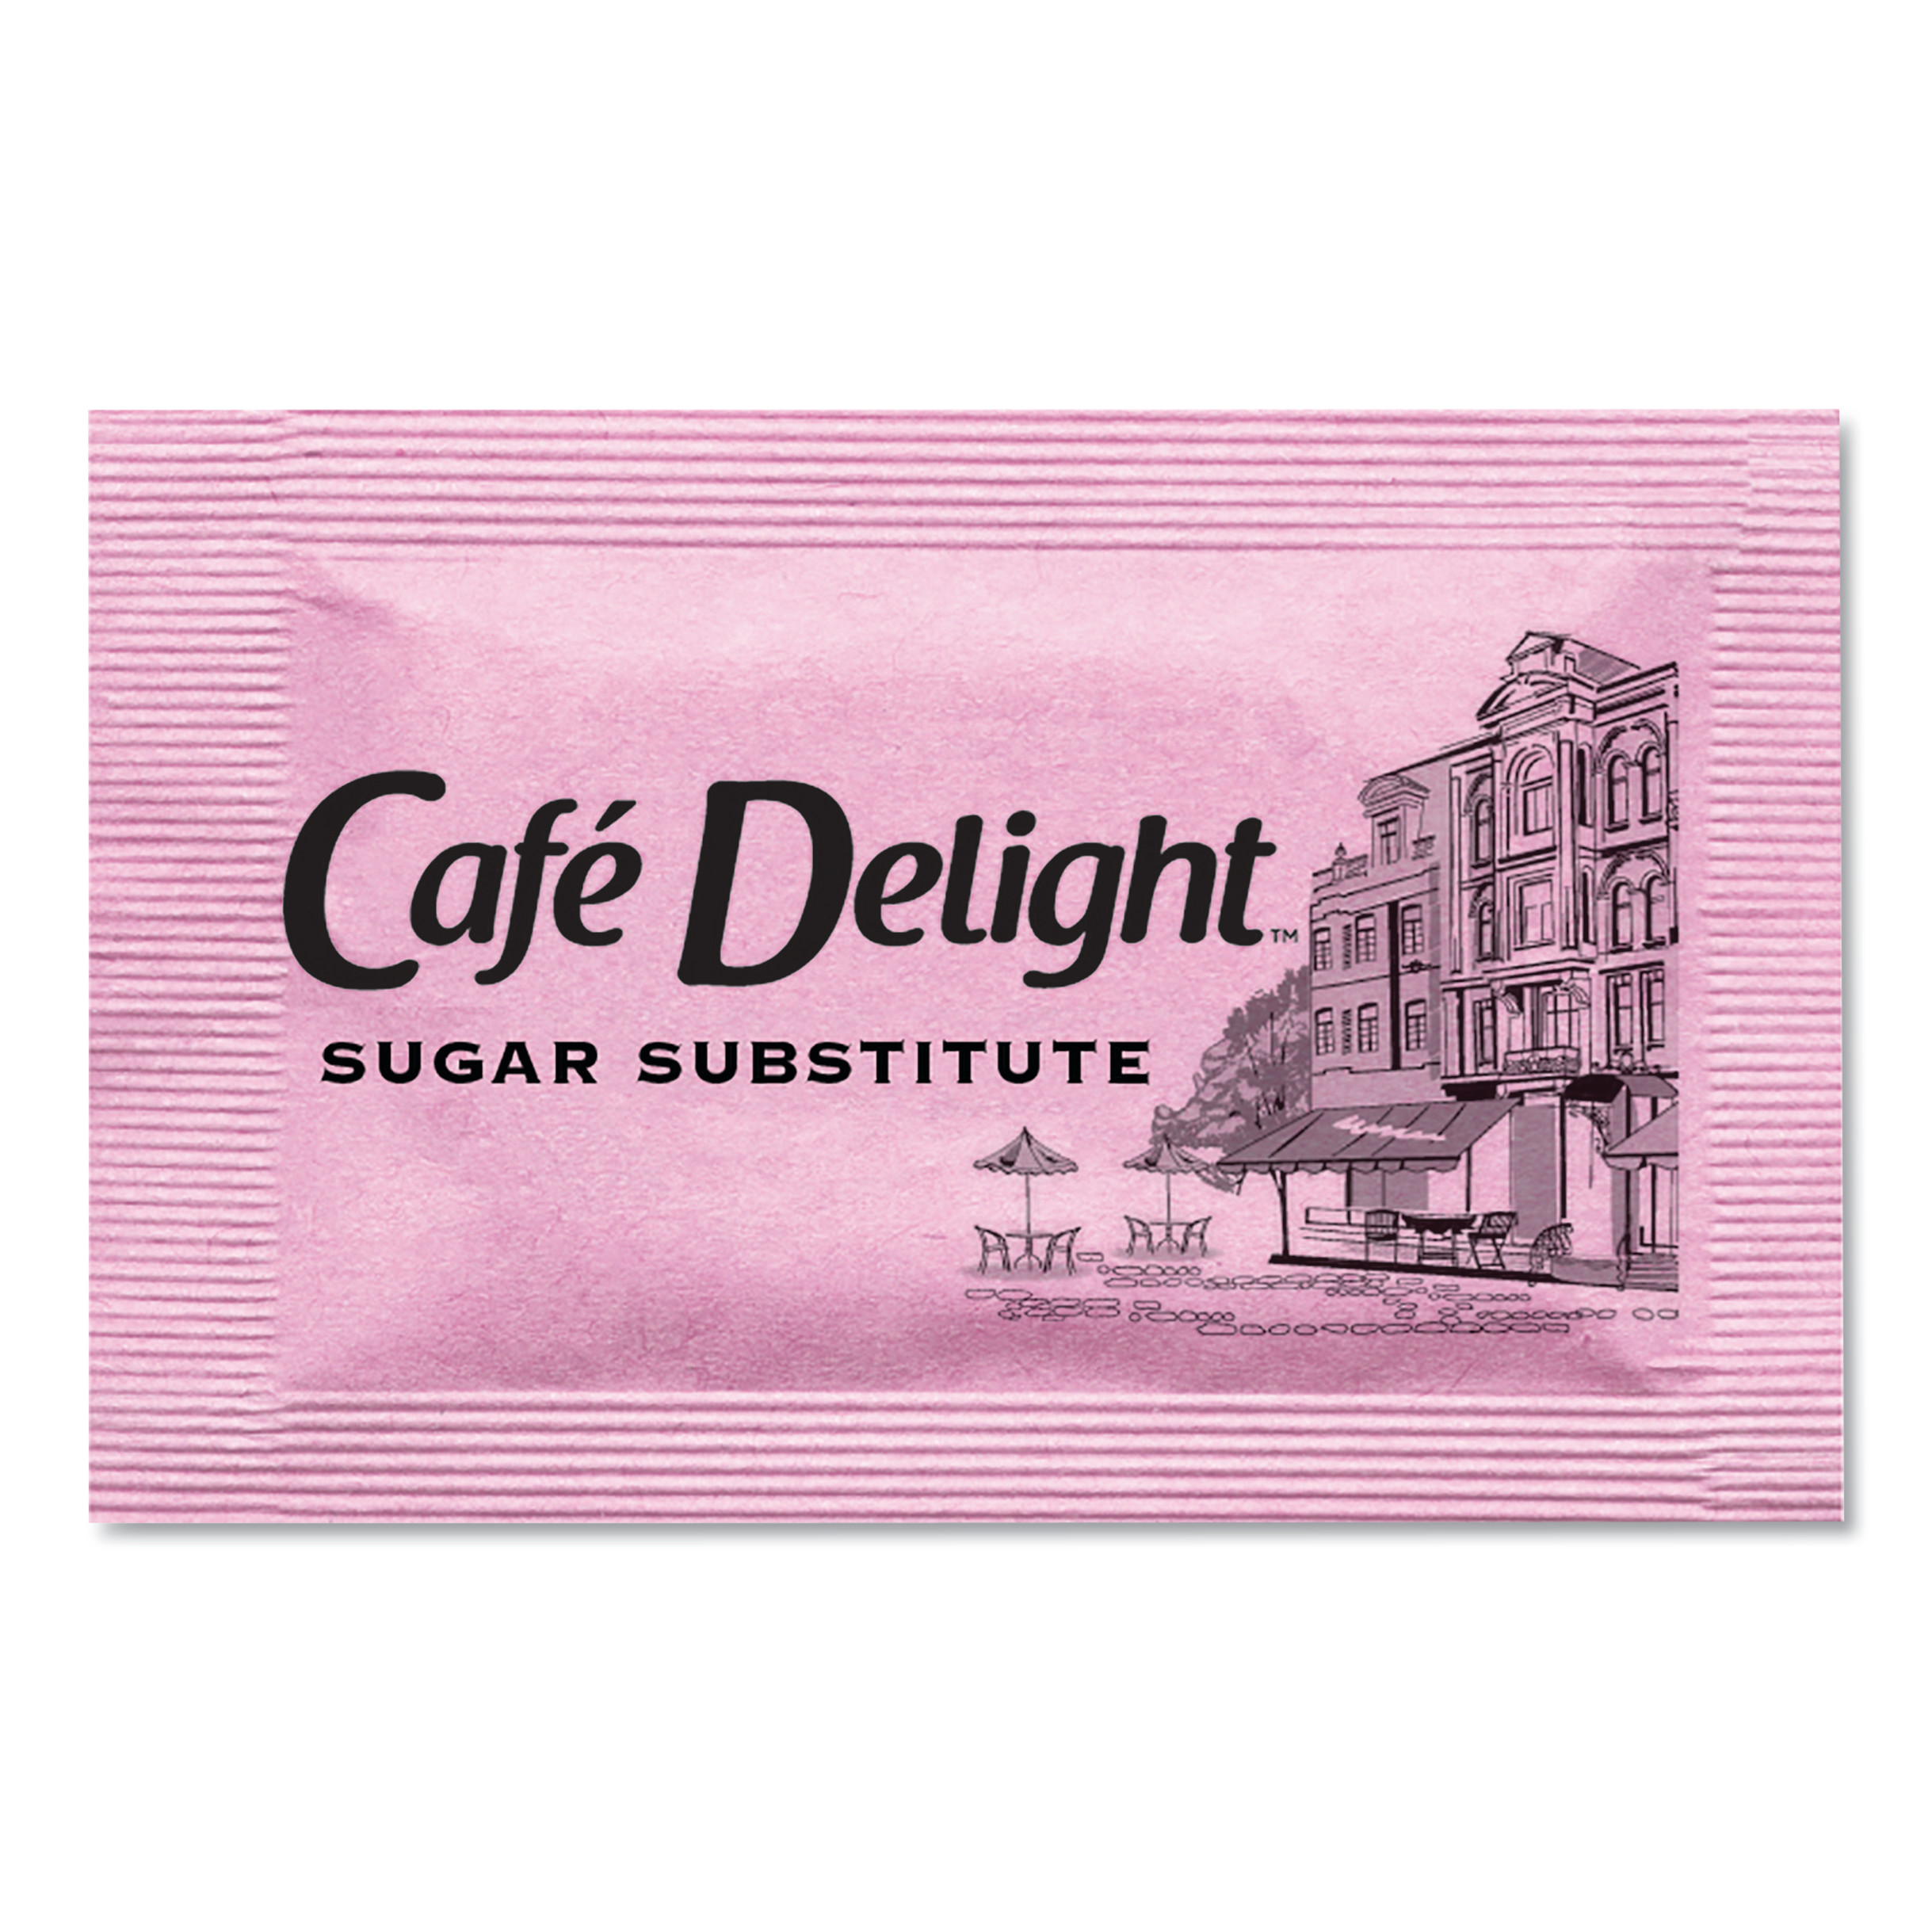  Café Delight OFX11420 Pink Sweetener Packets, 0.08 g Packet, 2000 Packets/Box (OFX11420) 